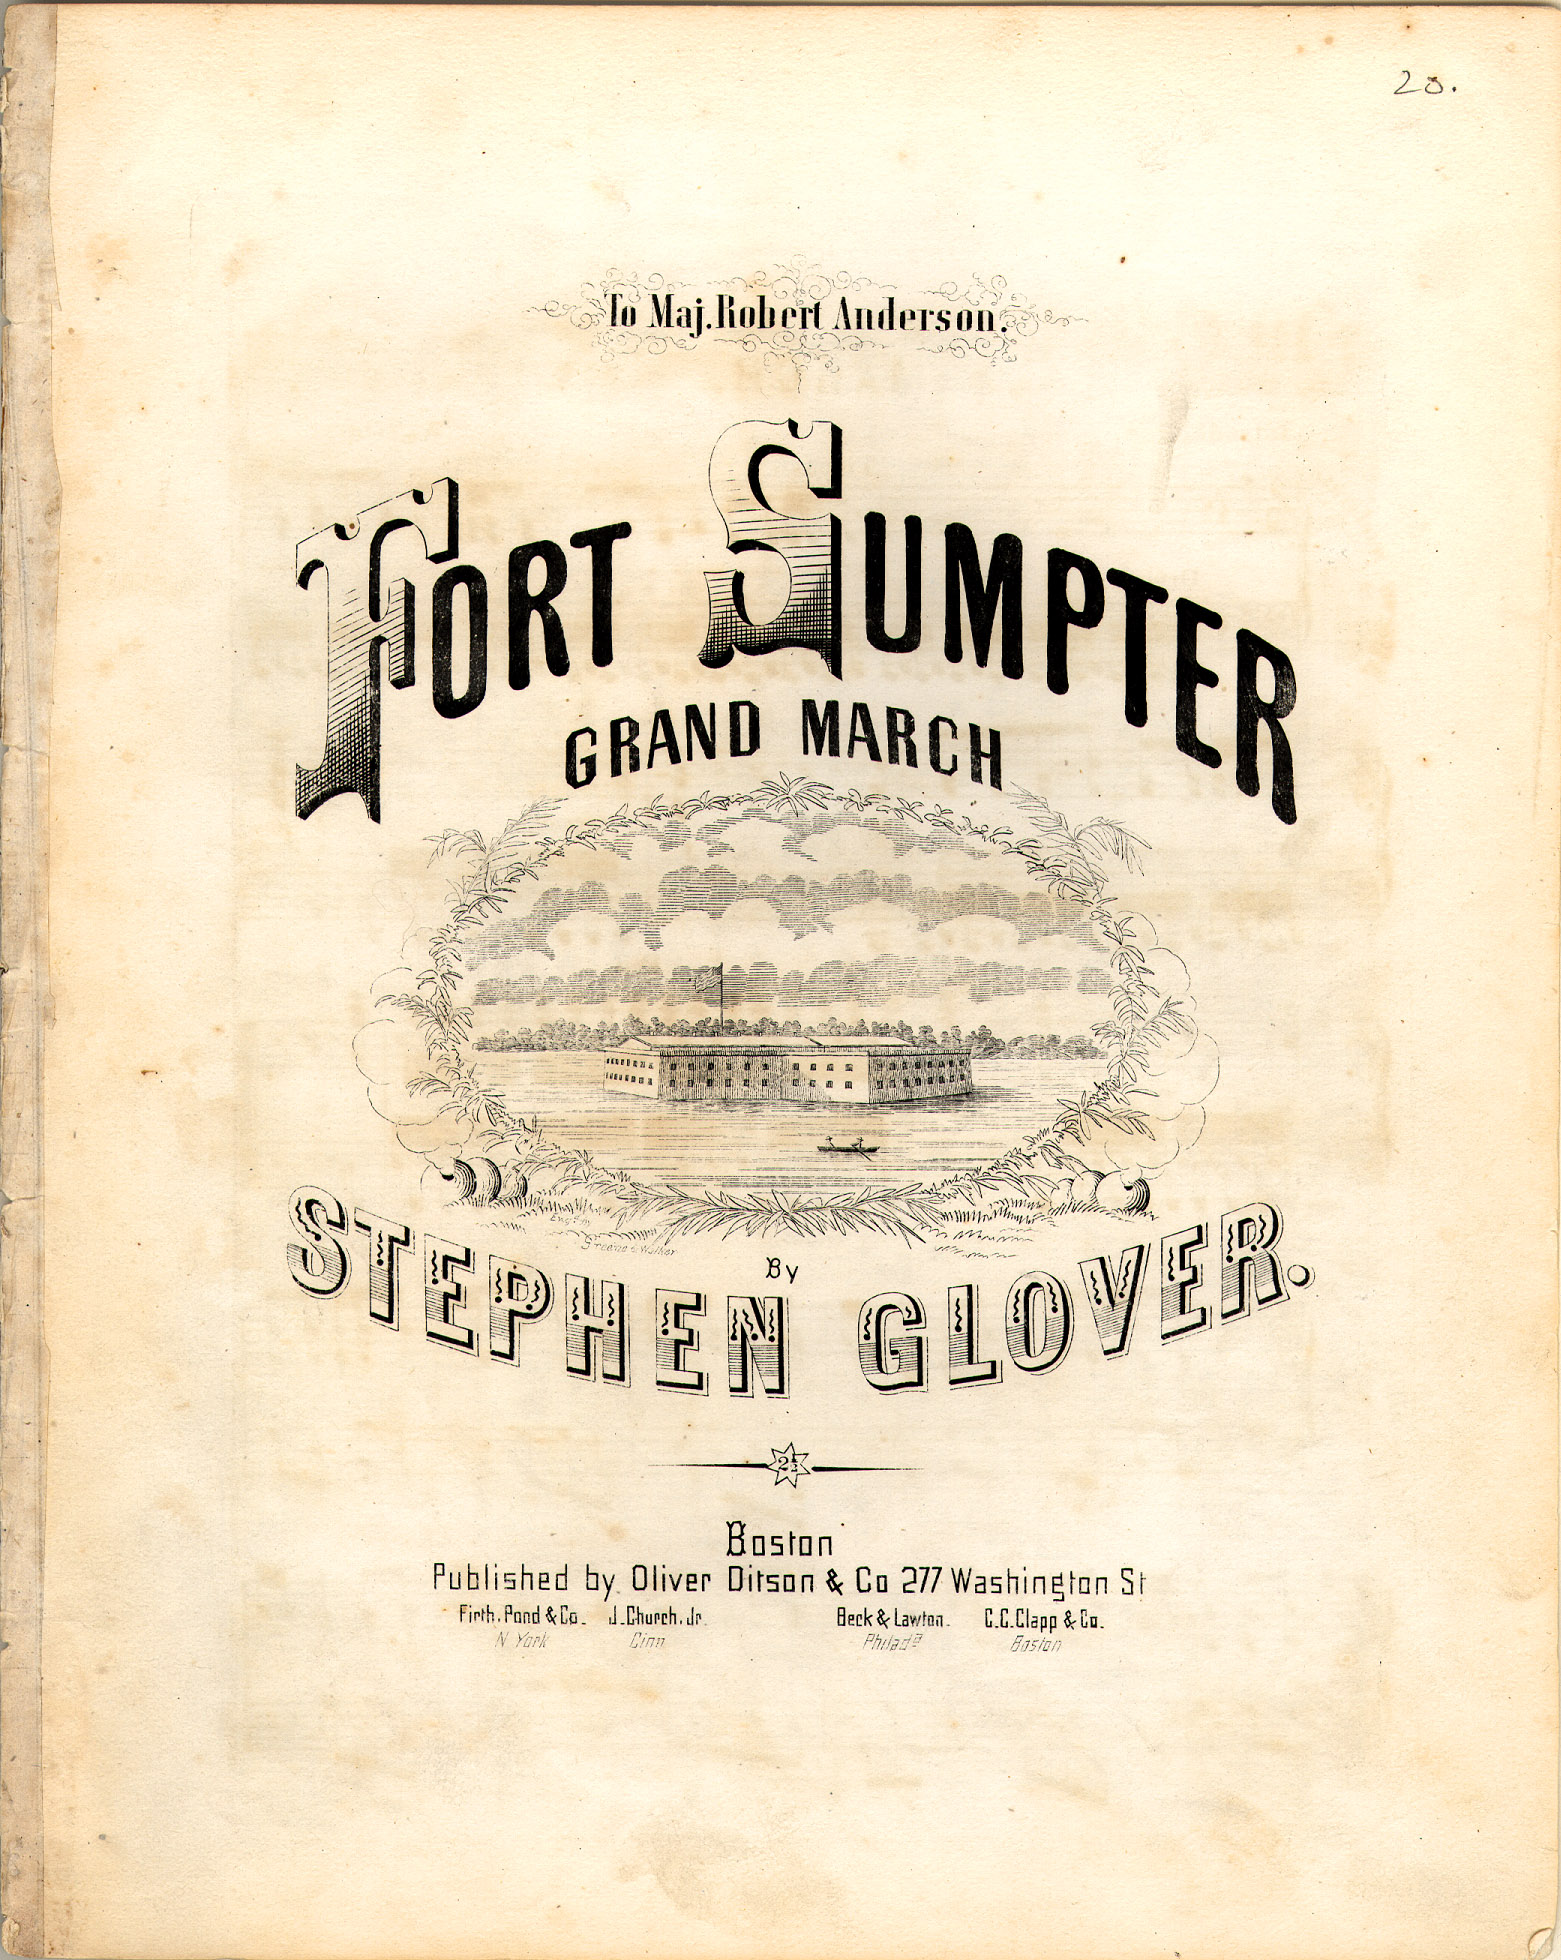 150dpi JPEG image of: Fort Sumpter grand march